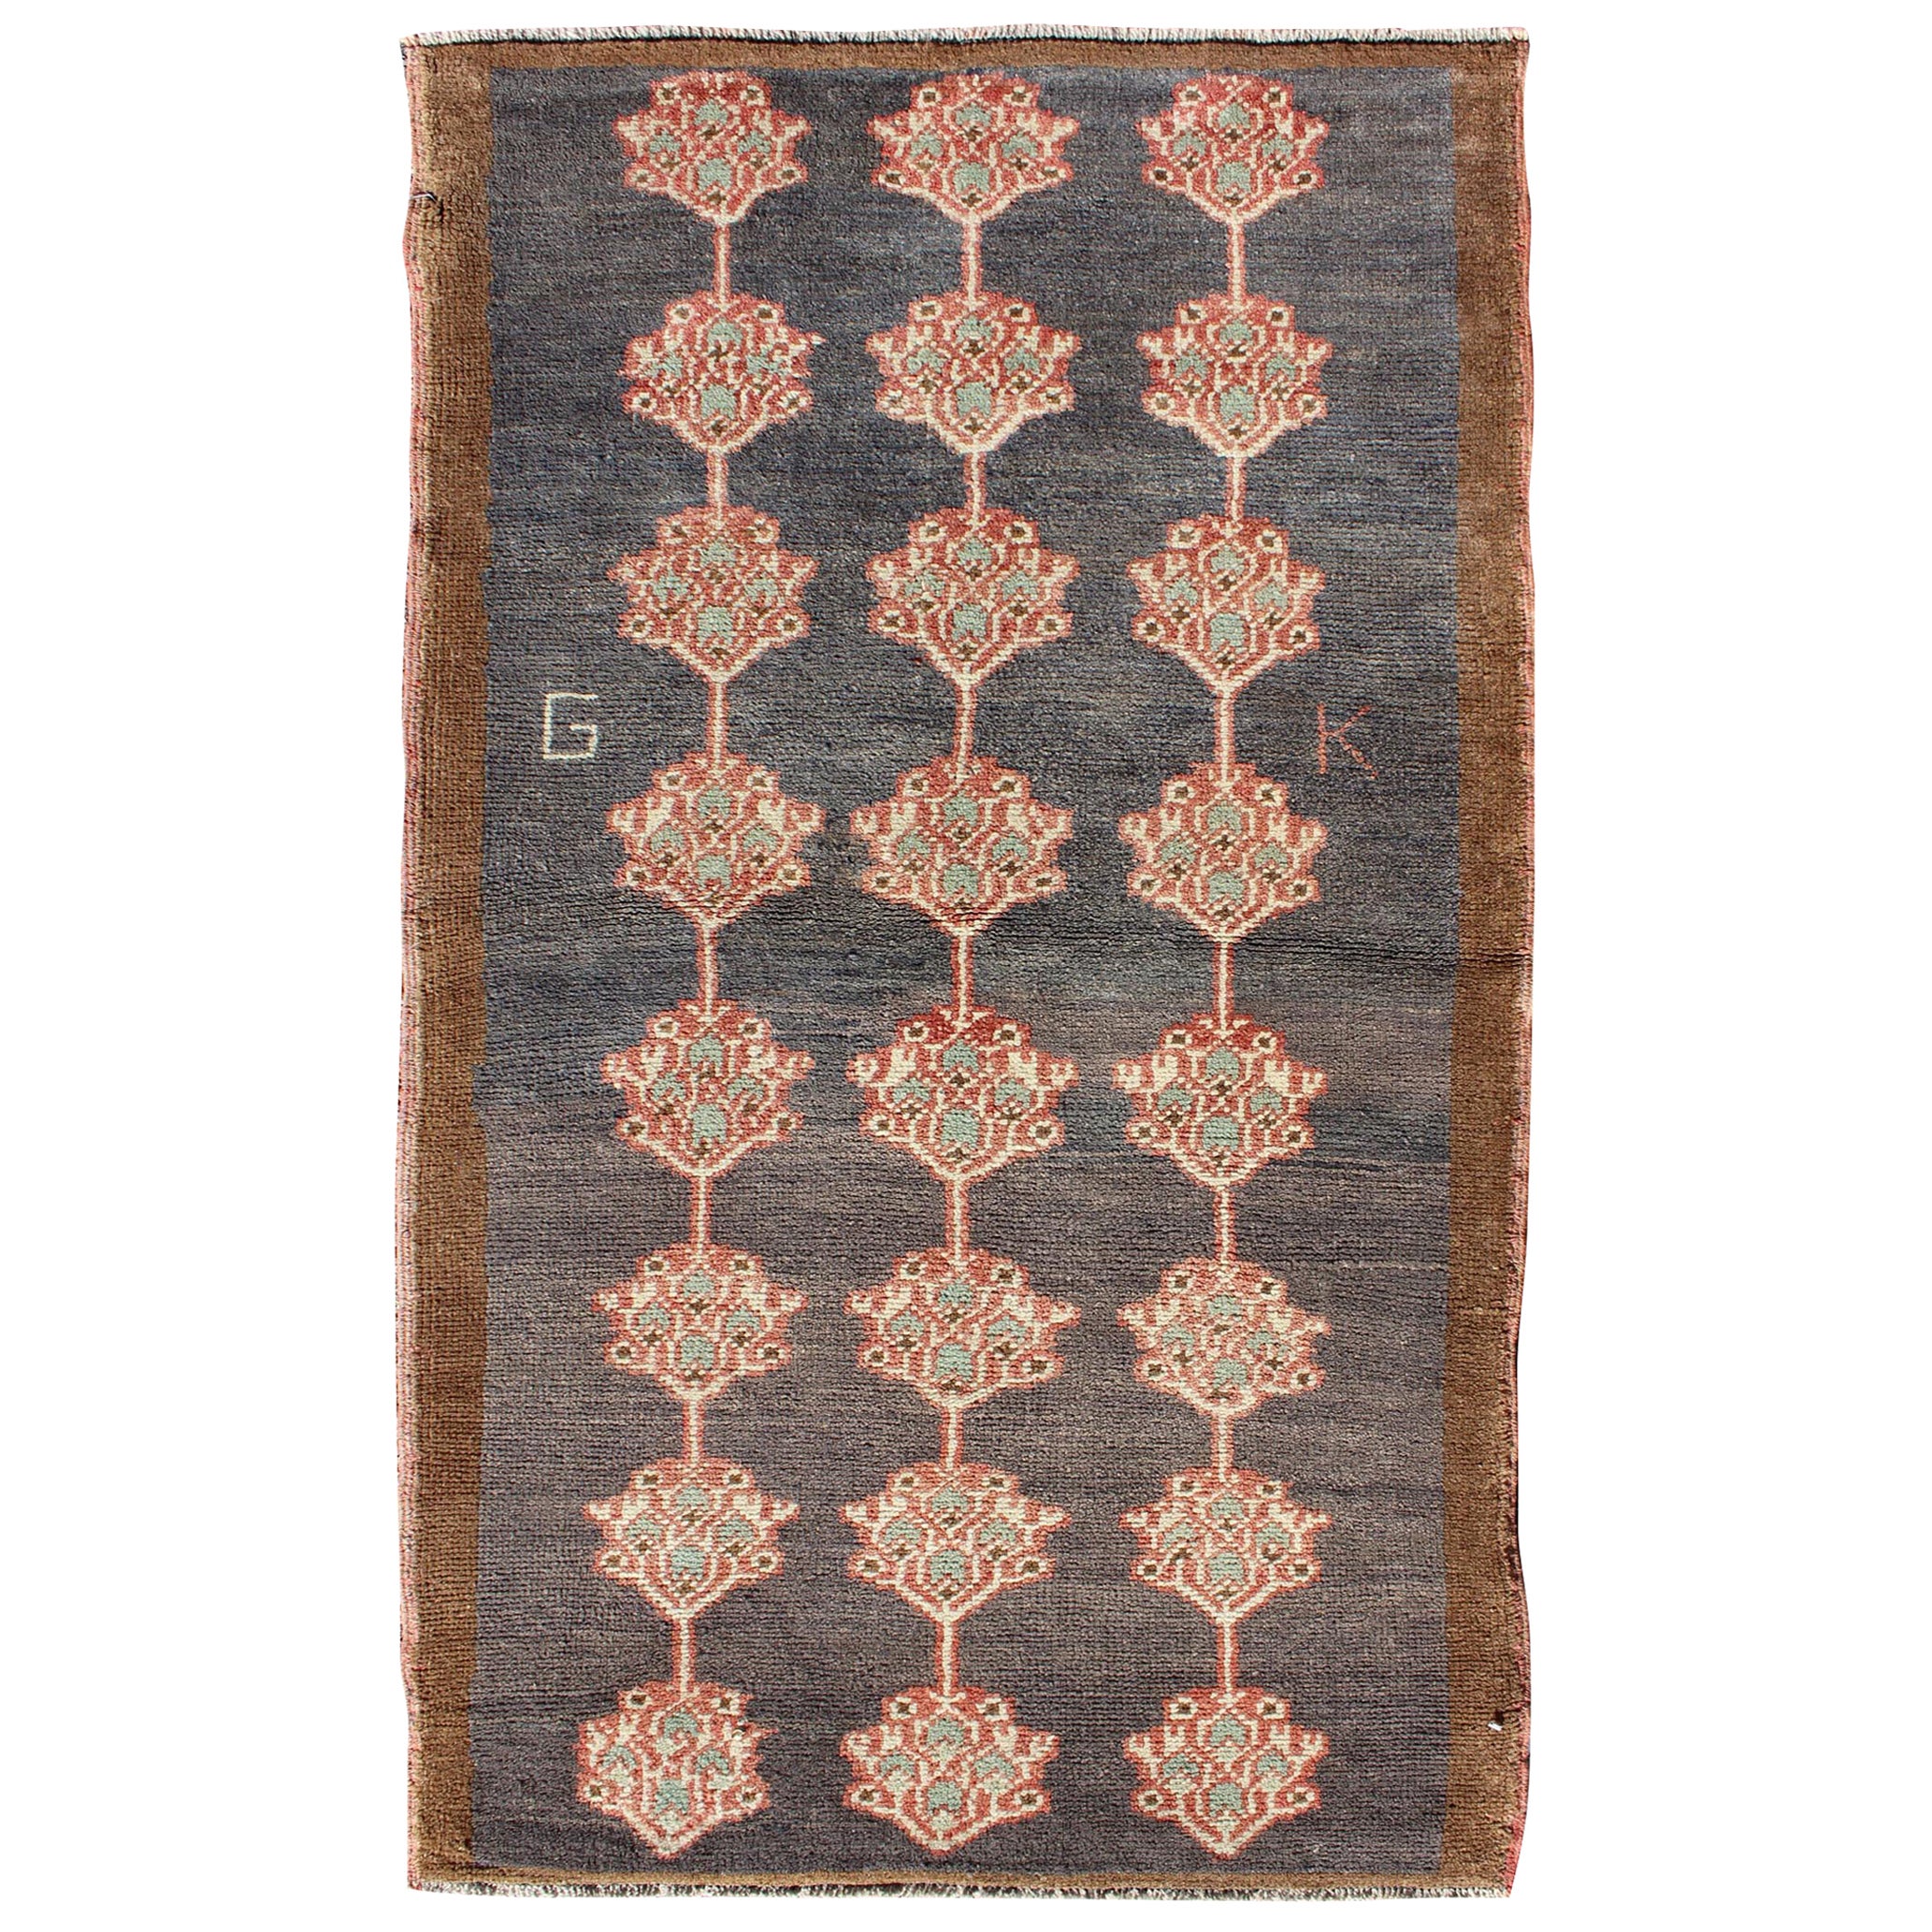 Vintage Turkish Tulu Carpet with Three Rows of Flowers on Gray & Charcoal Field For Sale